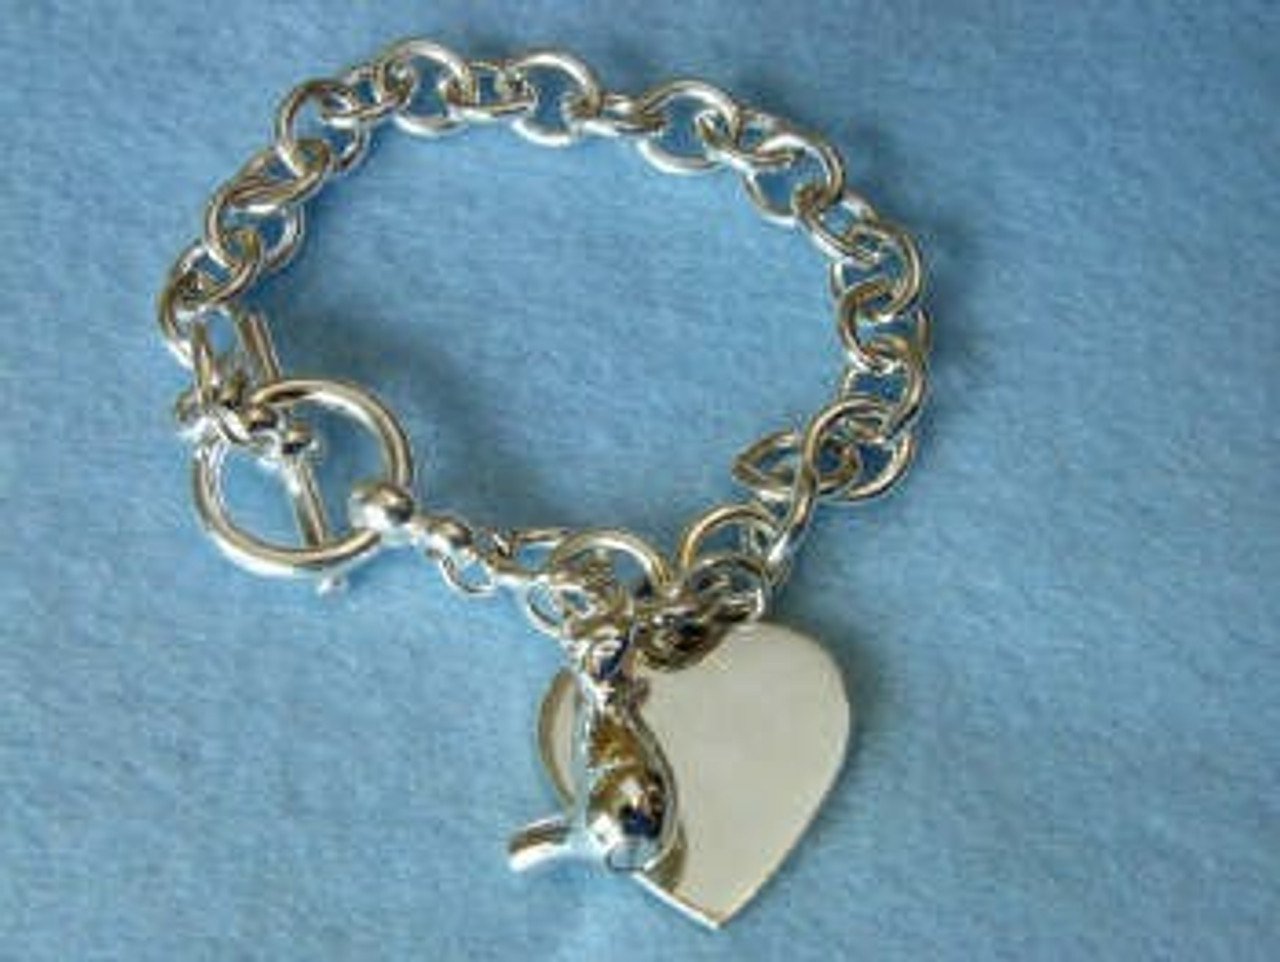 KittySensations™ Custom Cat Charm Bracelet with Personal Engraving in